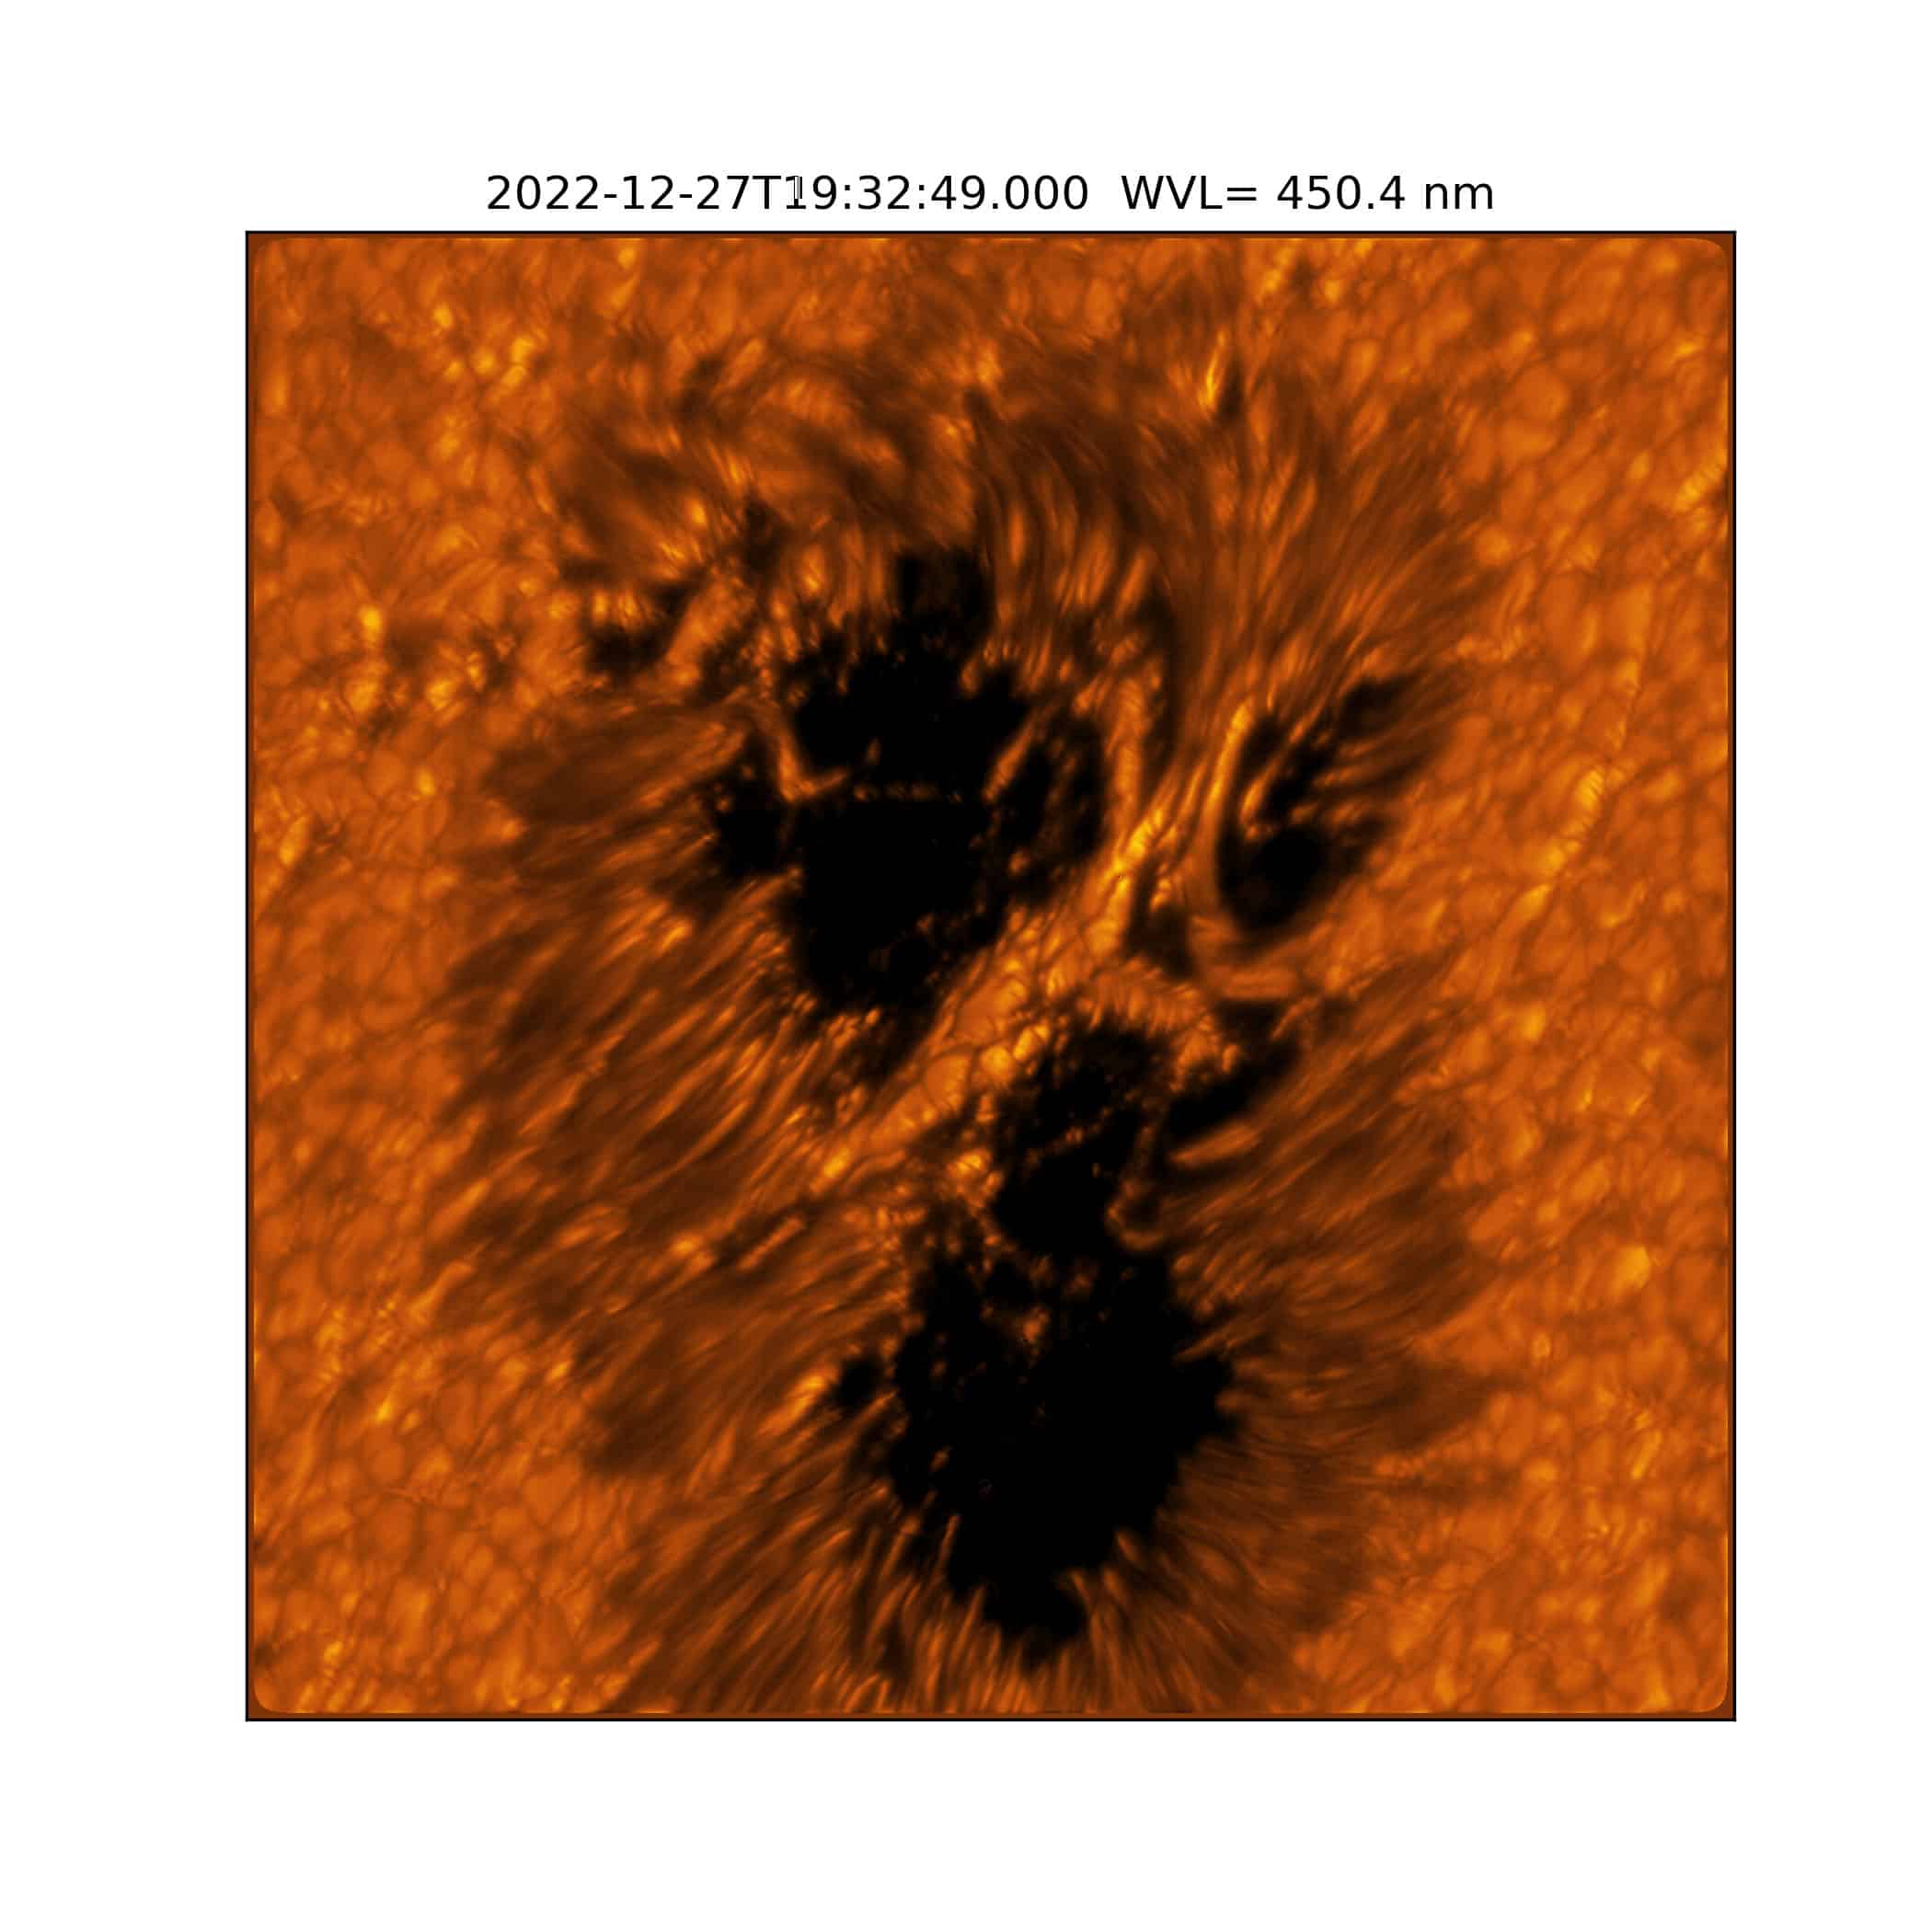 A light bridge is seen crossing a sunspot’s umbra from one end of the penumbra to the other. Light bridges are believed to be the signature of the start of a decaying sunspot, which will eventually break apart. Light bridges are very complex, taking different forms and phases. It is unknown how deep these structures form. This image shows one example of a light bridge in remarkable detail. Umbra: Dark, central region of a sunspot where the magnetic field is strongest. Penumbra: The brighter, surrounding region of a sunspot’s umbra characterized by bright filamentary structures. Image Title: A Light Bridge Captured in a Sunspot PID: PID_1_50 Large Field of View: 30,720km x 30,720km Image Credit: NSF/AURA/NSO Image Processing: Friedrich Wöger(NSO), Catherine Fischer (NSO) Science Credit: Tetsu Anan (NSO)